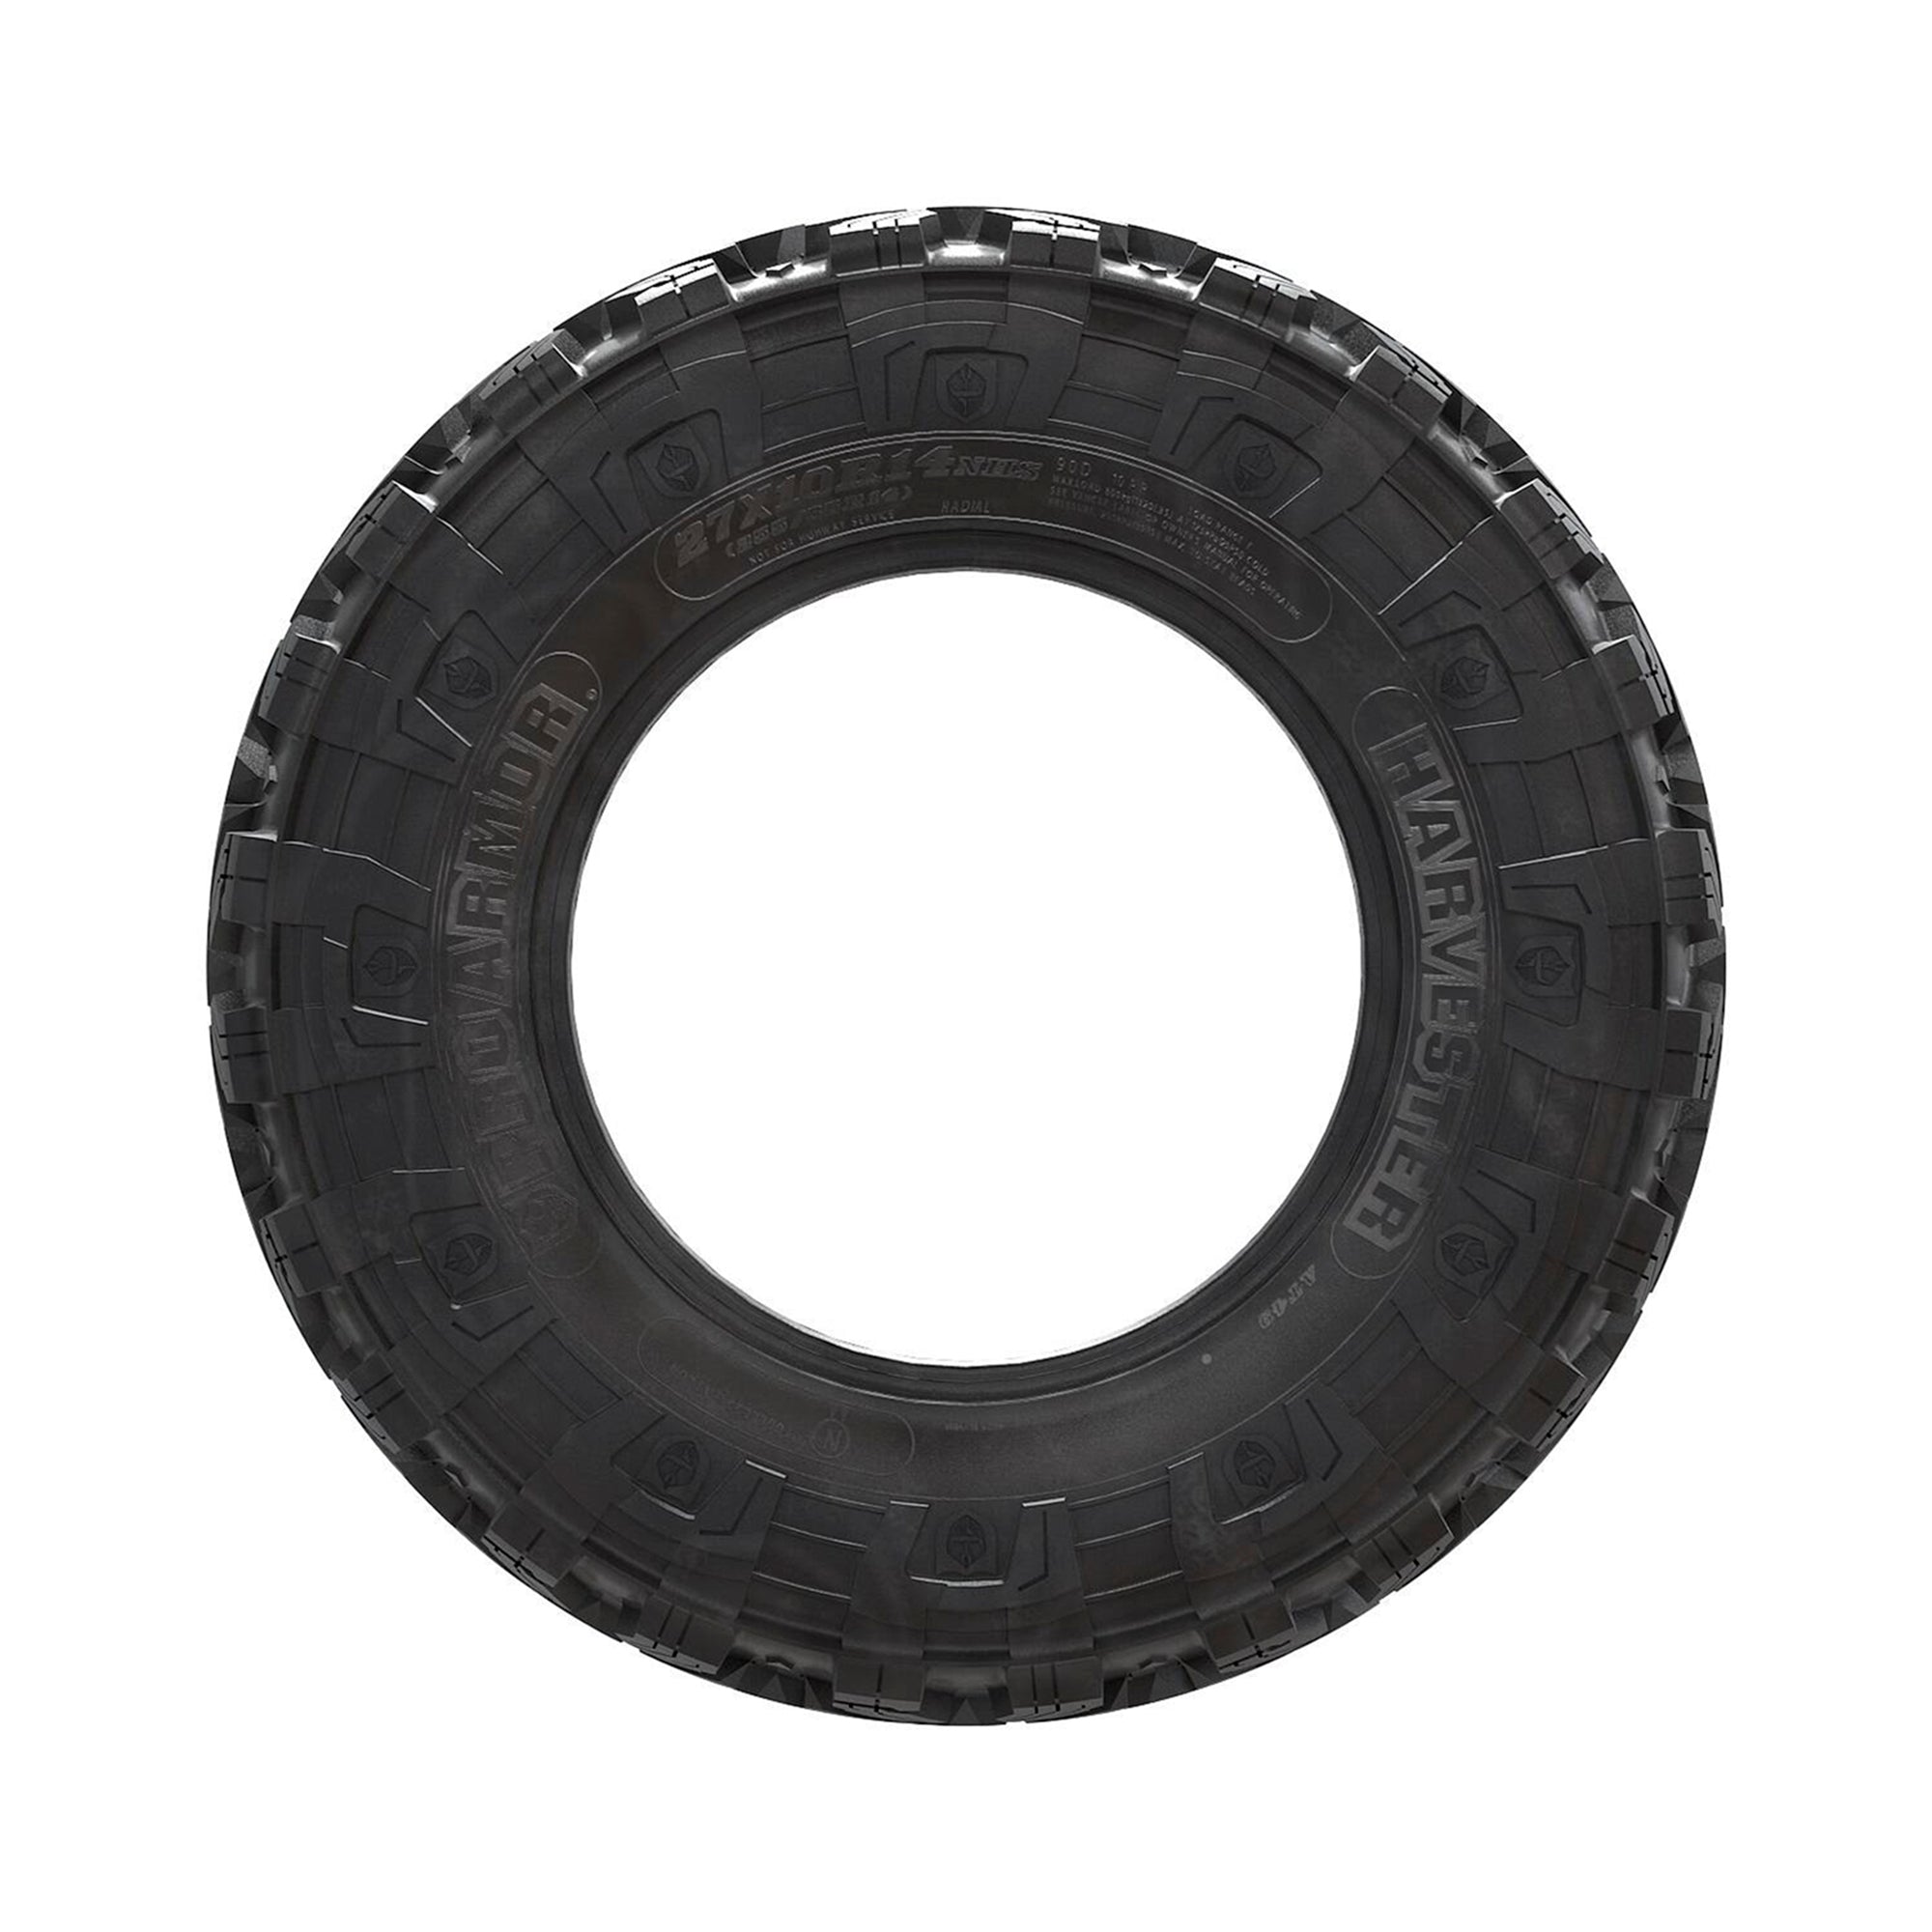 Pro Armor Front/Rear Harvester Tire 27x10R14 5415965